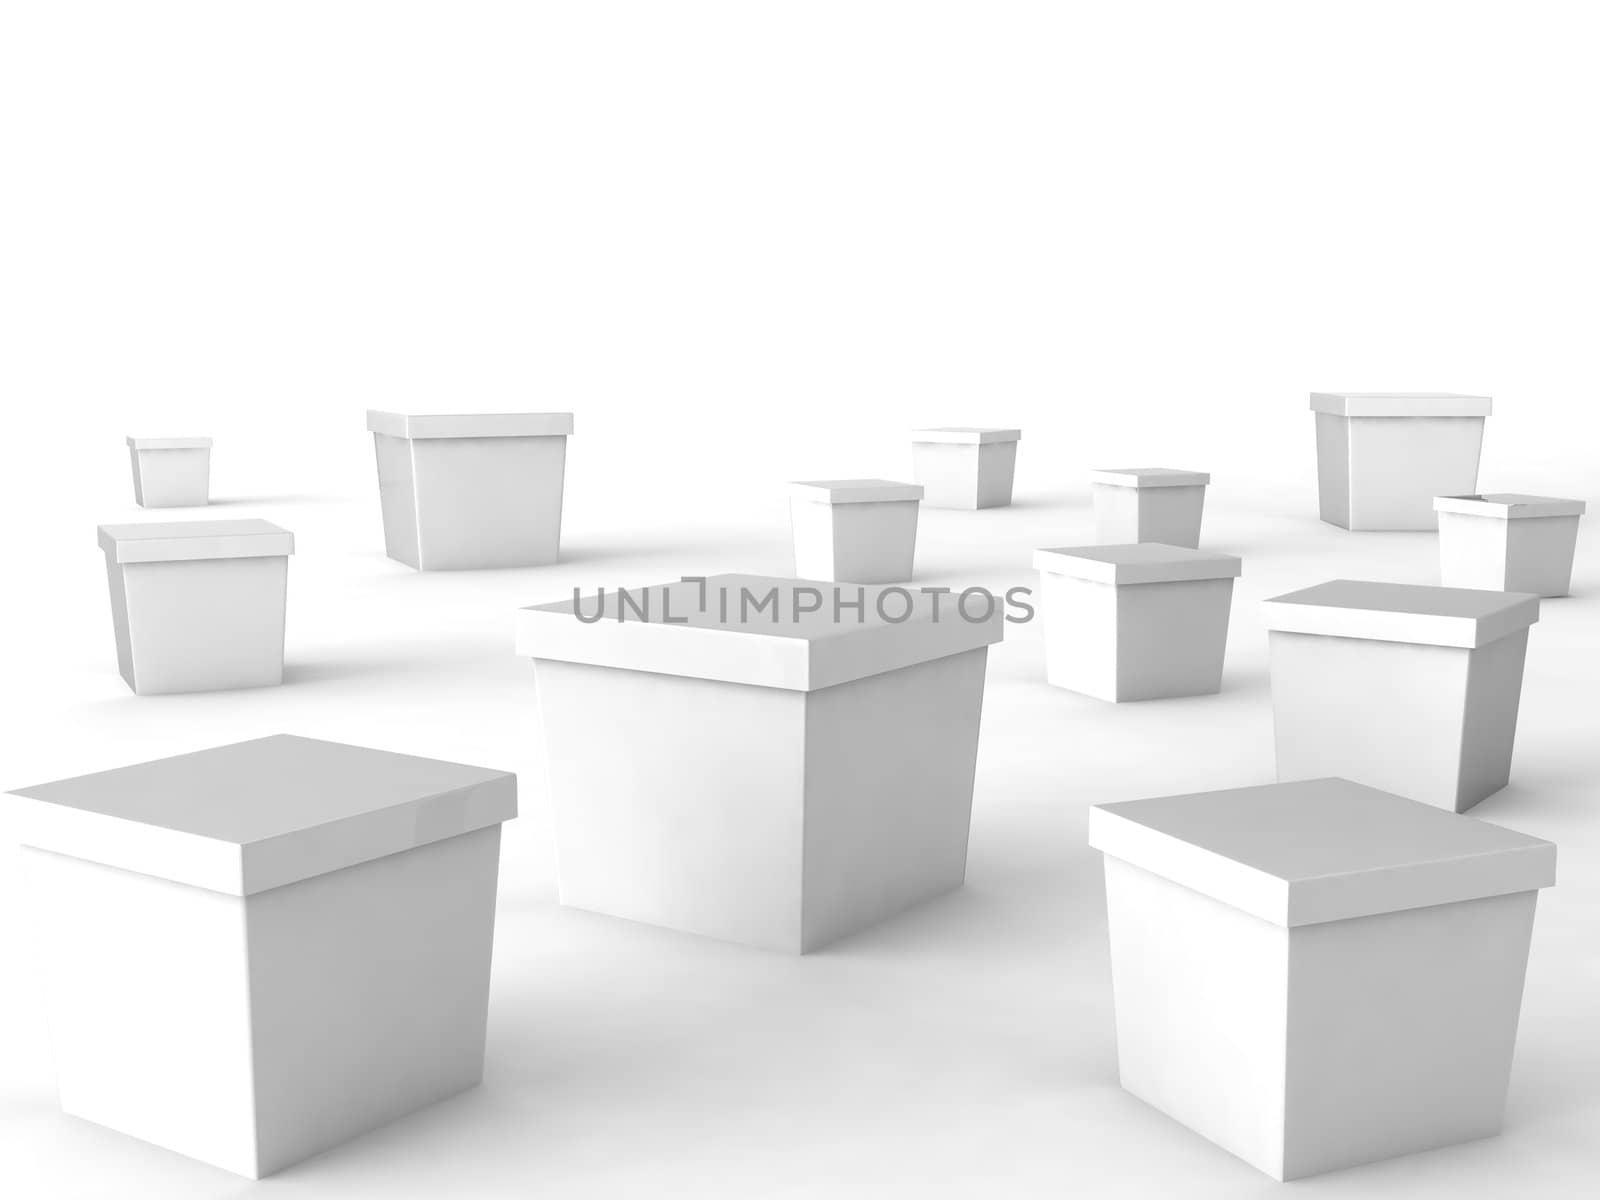 isolated three dimensional white boxes

